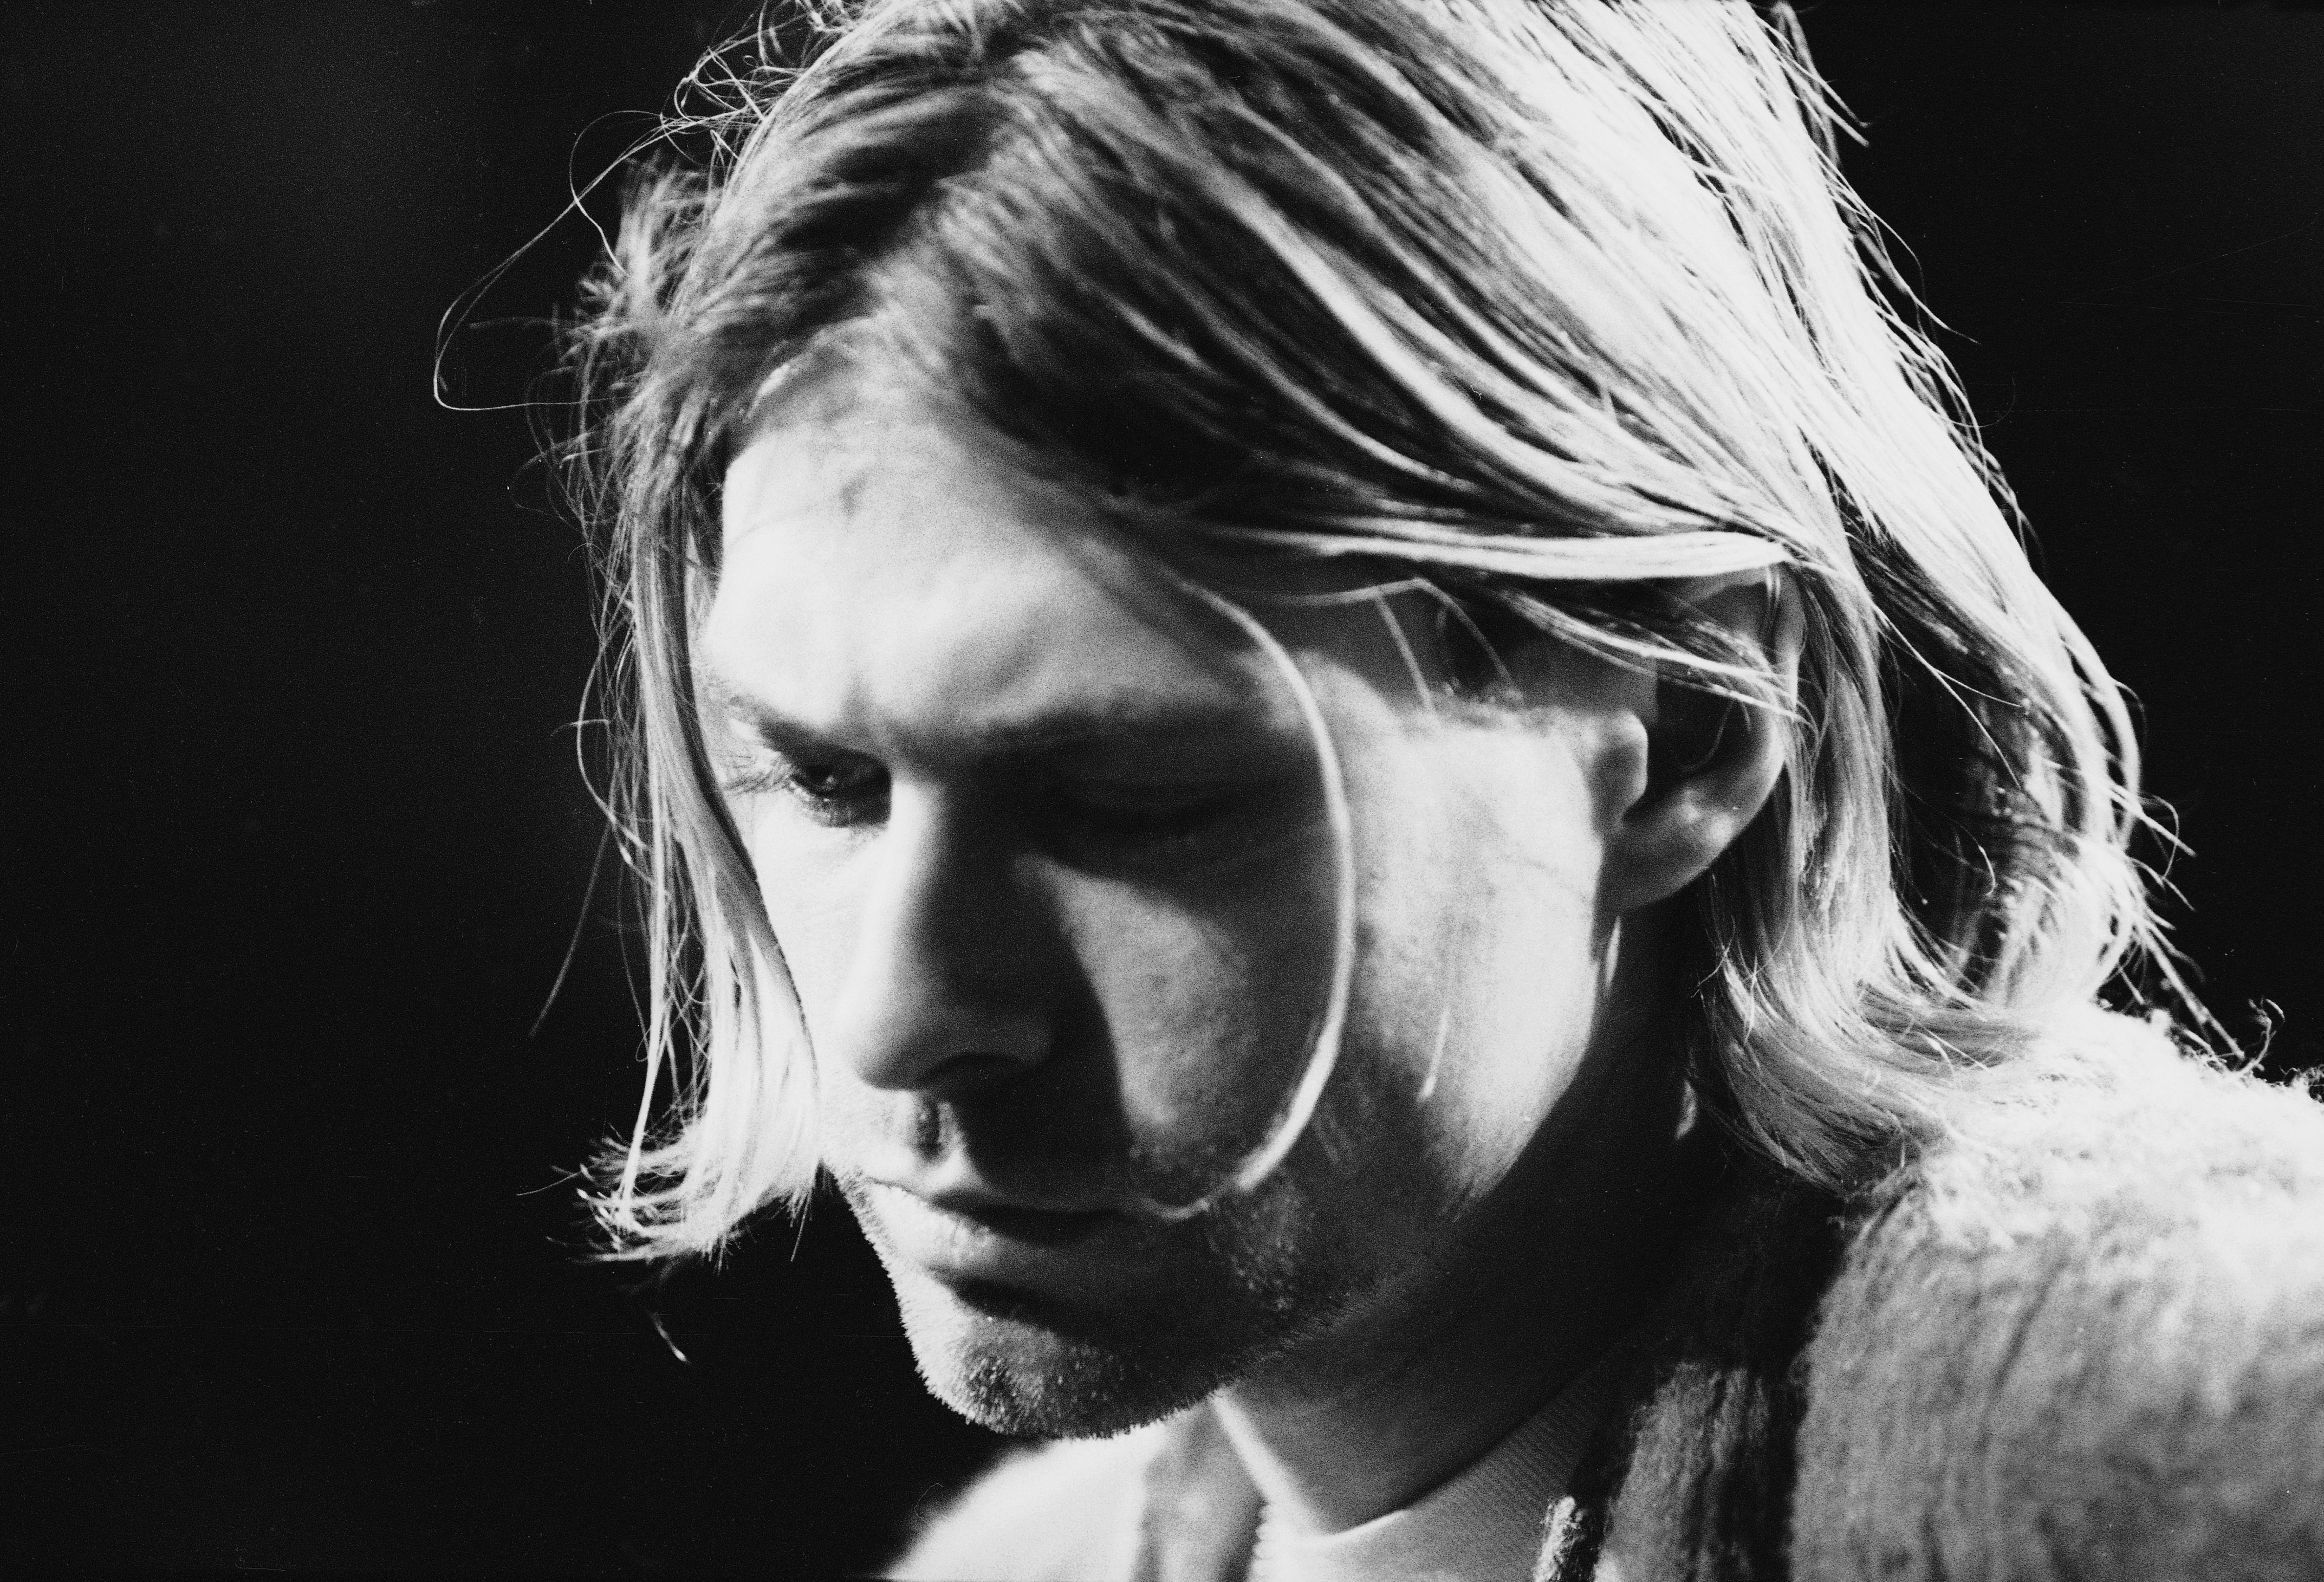 Kurt Cobain performs with Nirvana on 'MTV Unplugged,' on Nov. 18, 1993, in New York City.